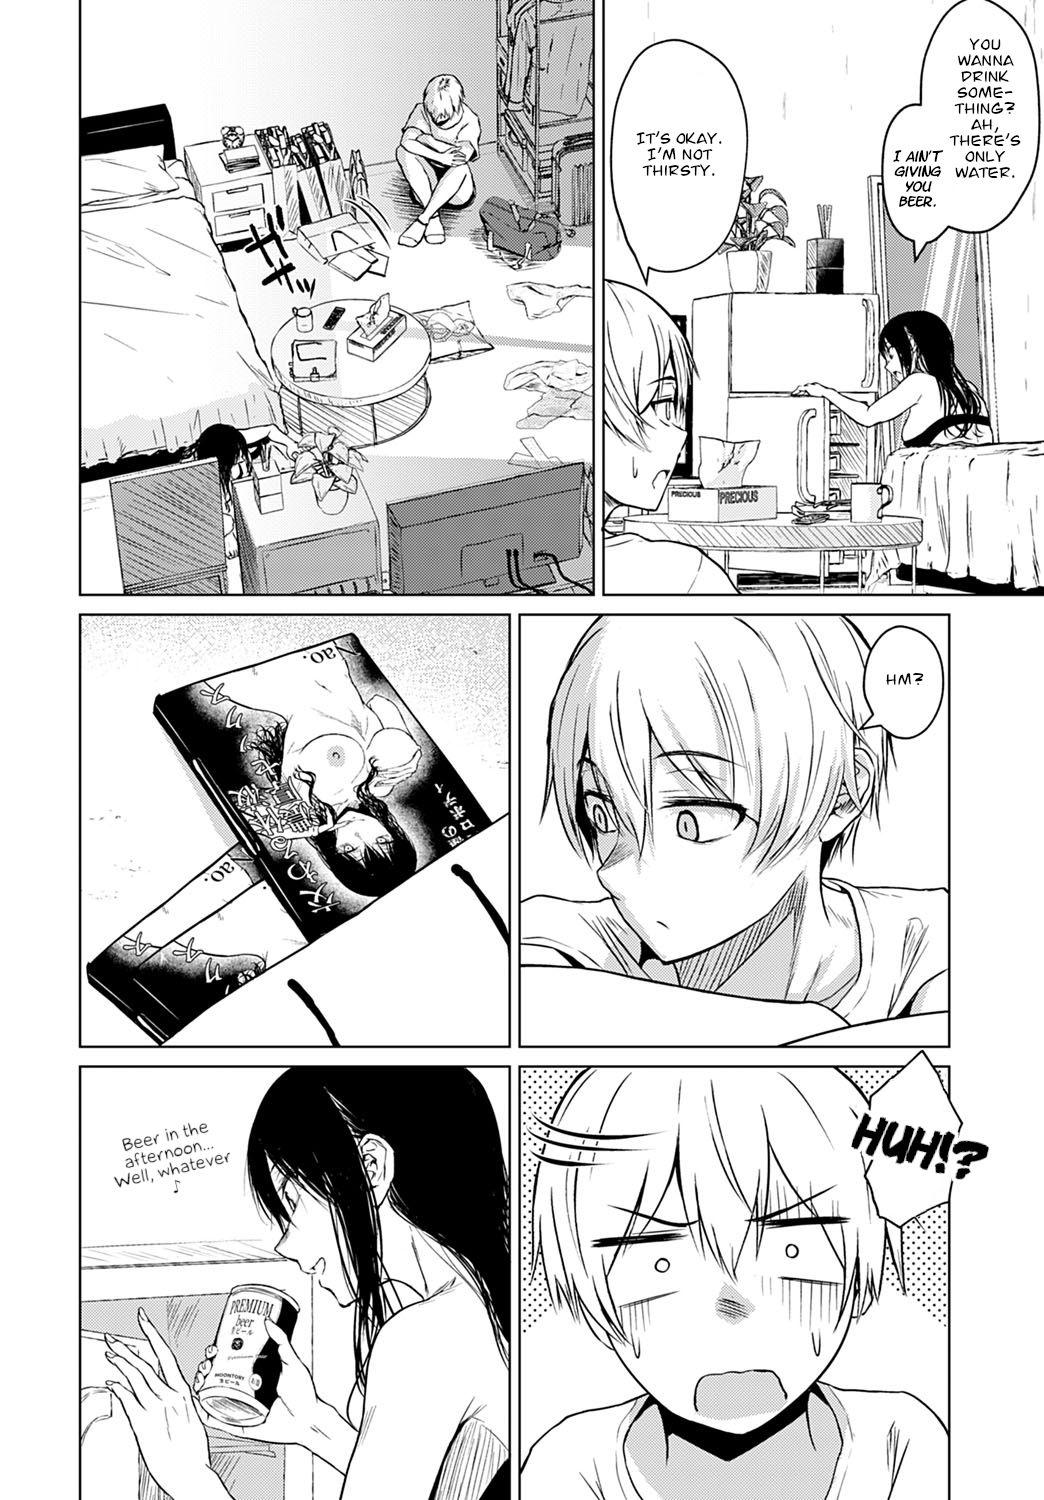 Awesome Koko kara | From Here Blondes - Page 8